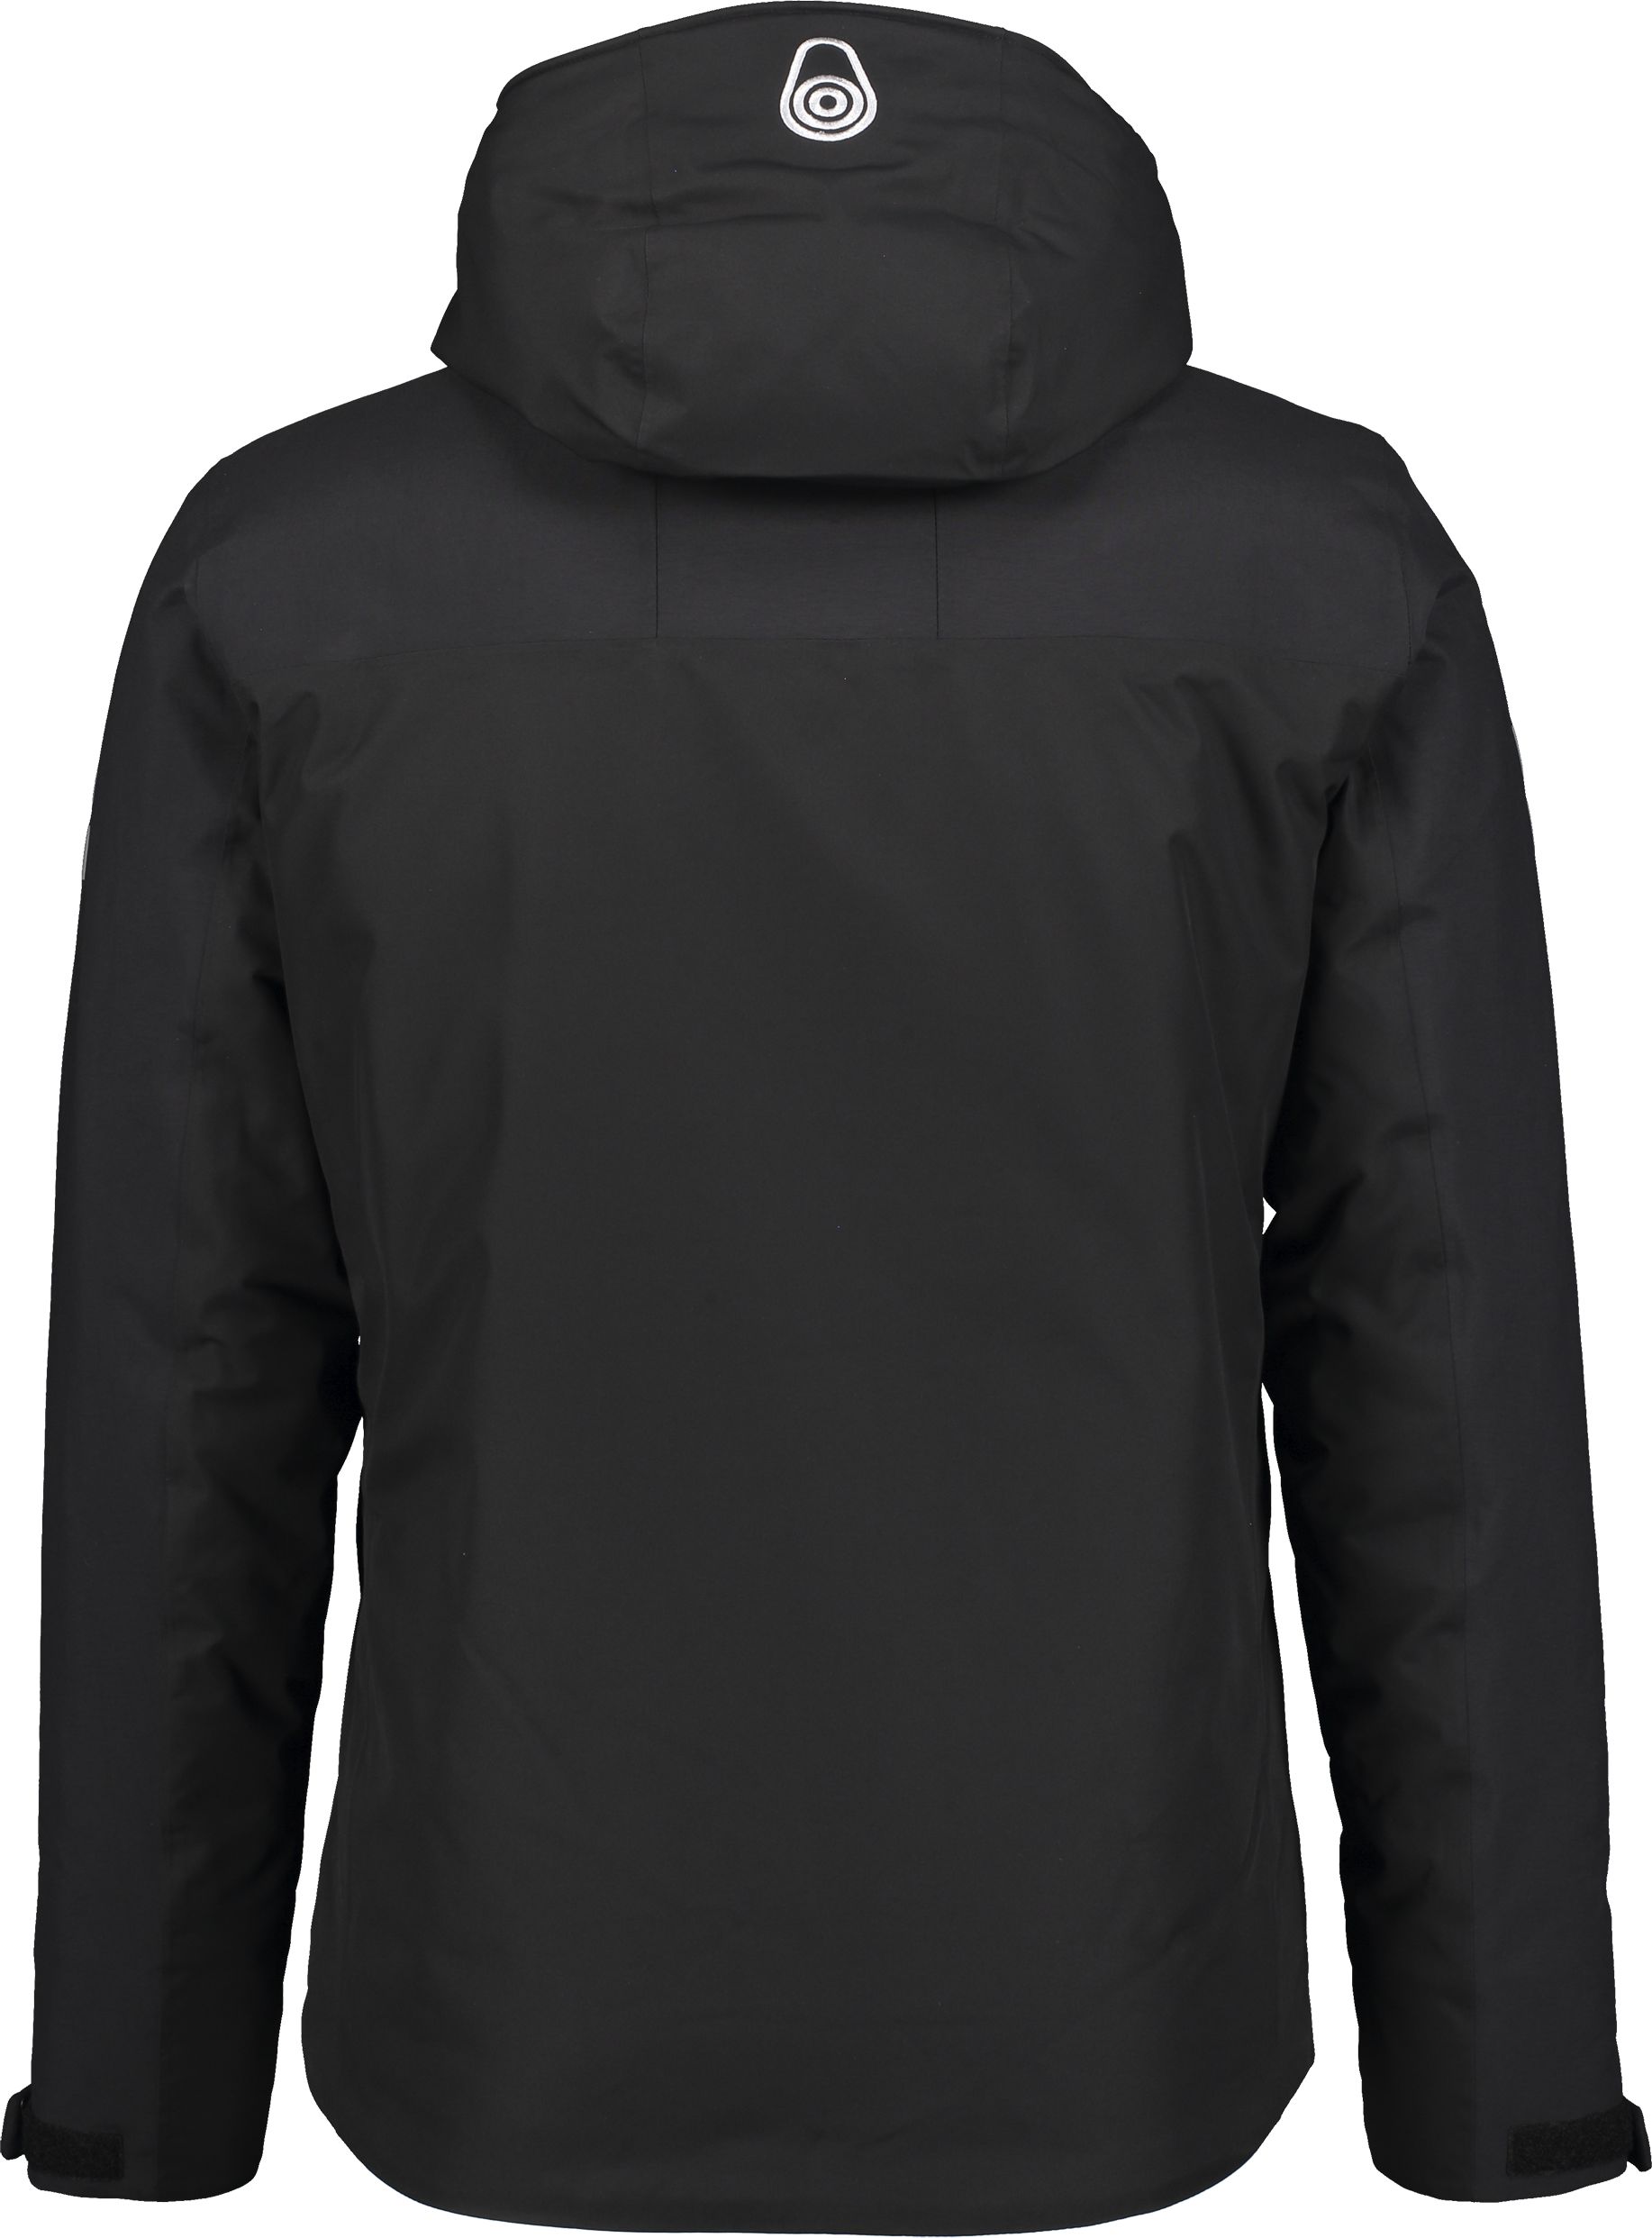 SAIL RACING, M CAPE INSULATED JACKET